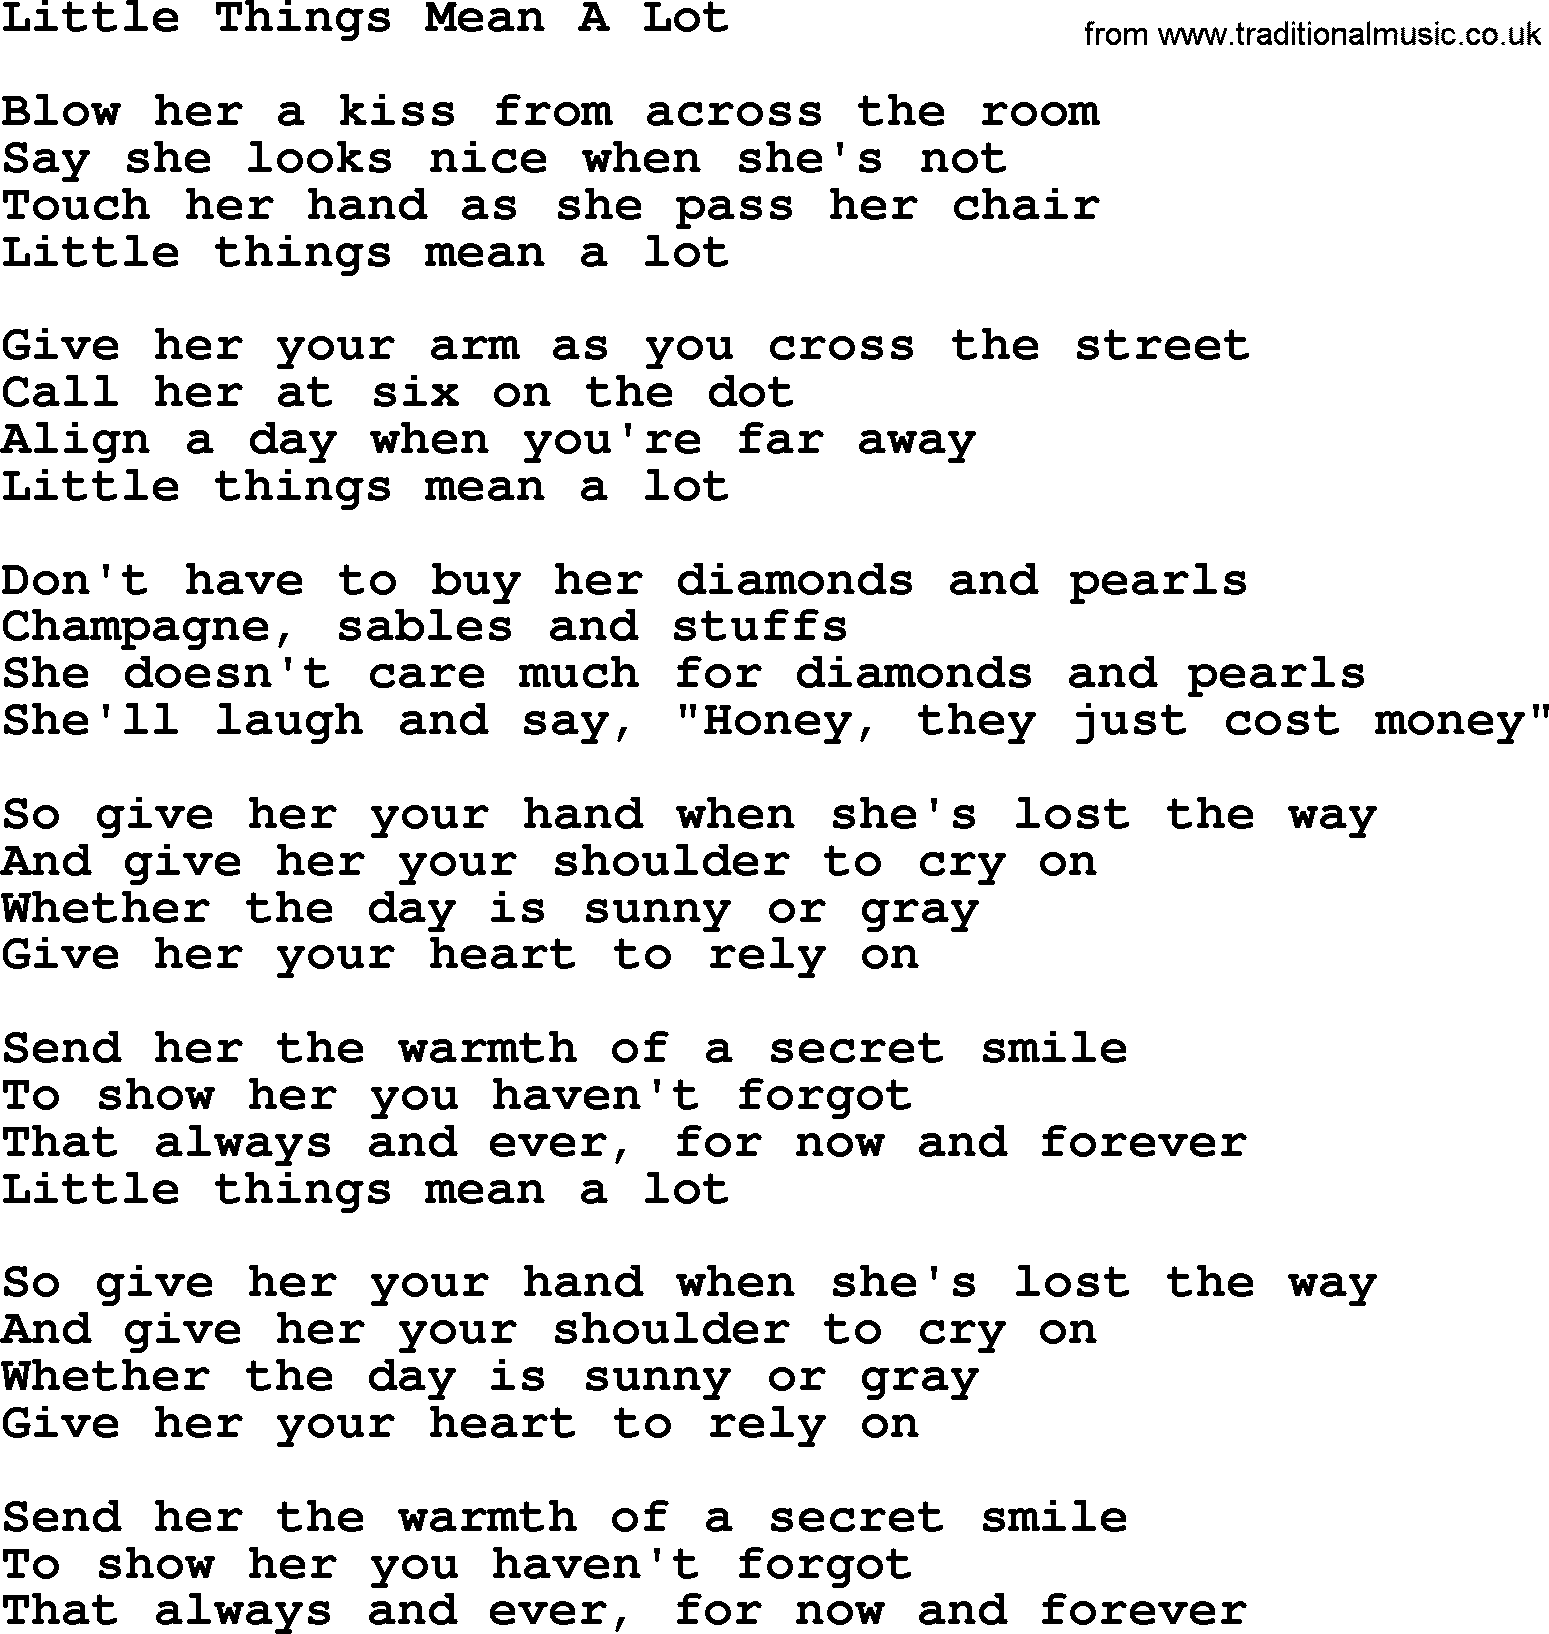 Willie Nelson song: Little Things Mean A Lot lyrics